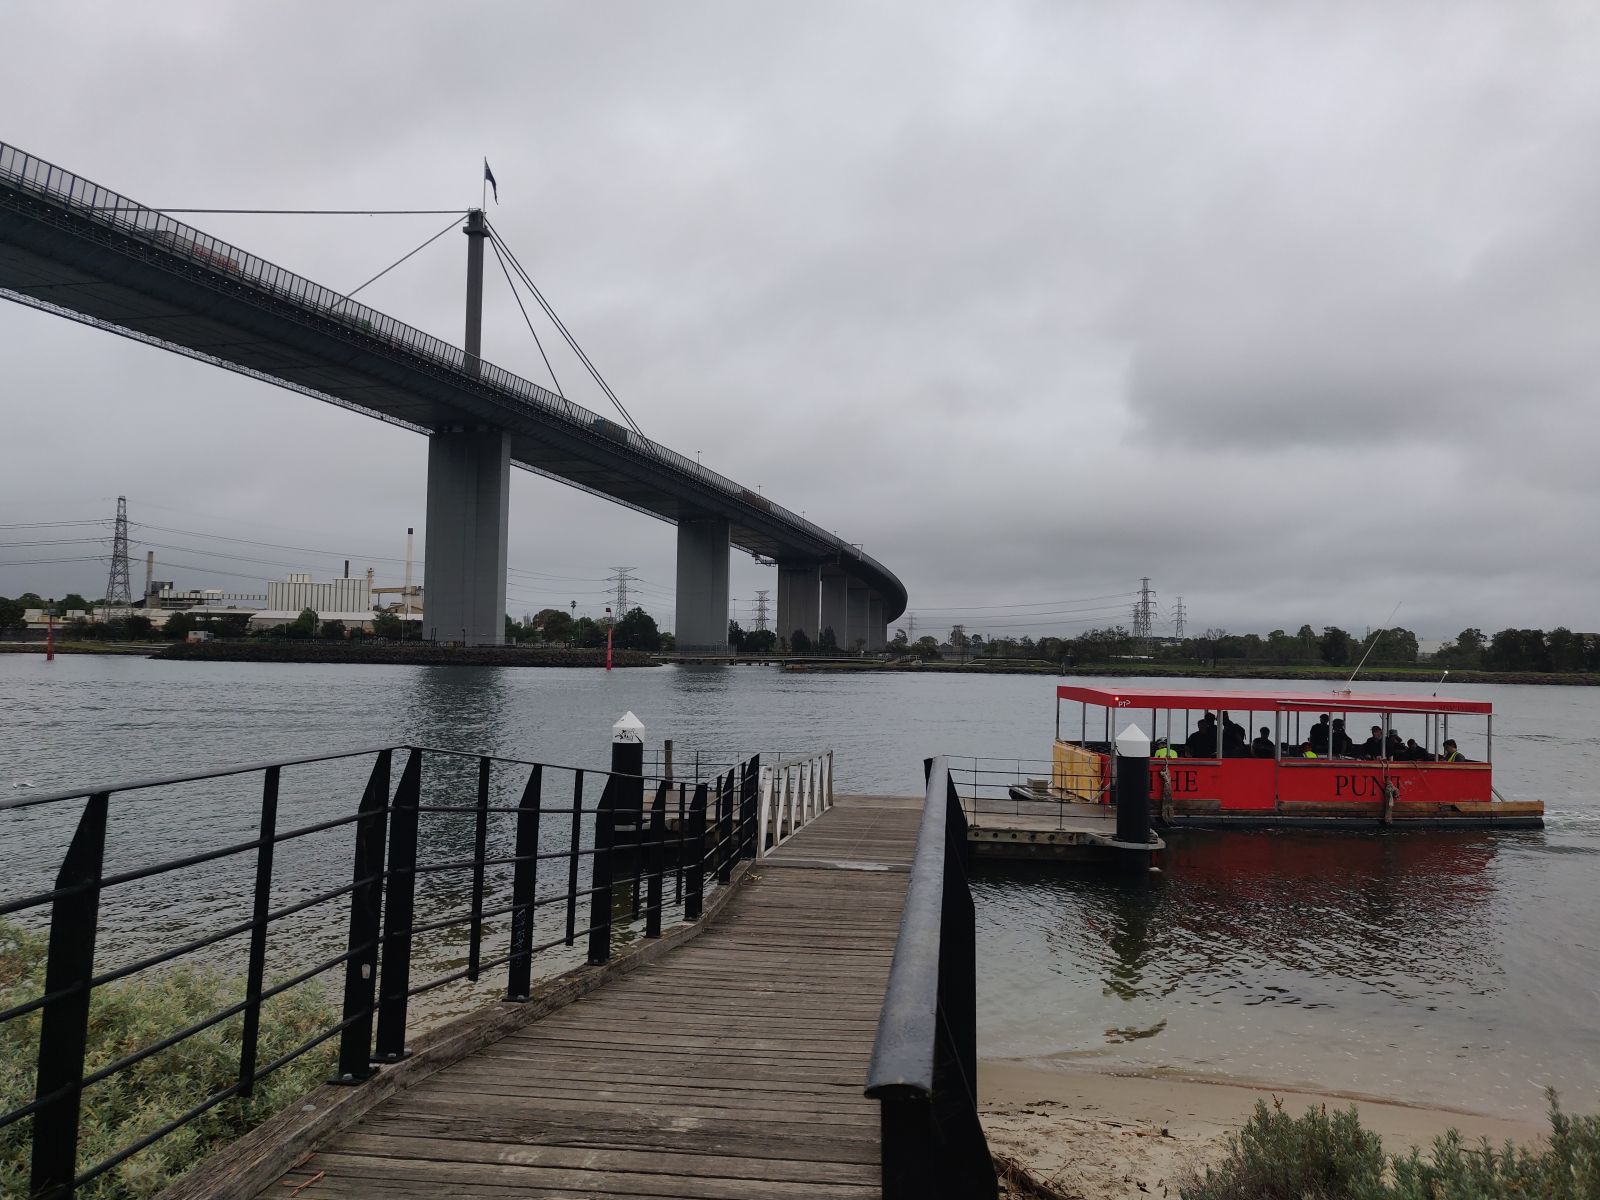 The West Gate Bridge, and the little ferry I used to cross the river. Can’t run on the bridge.